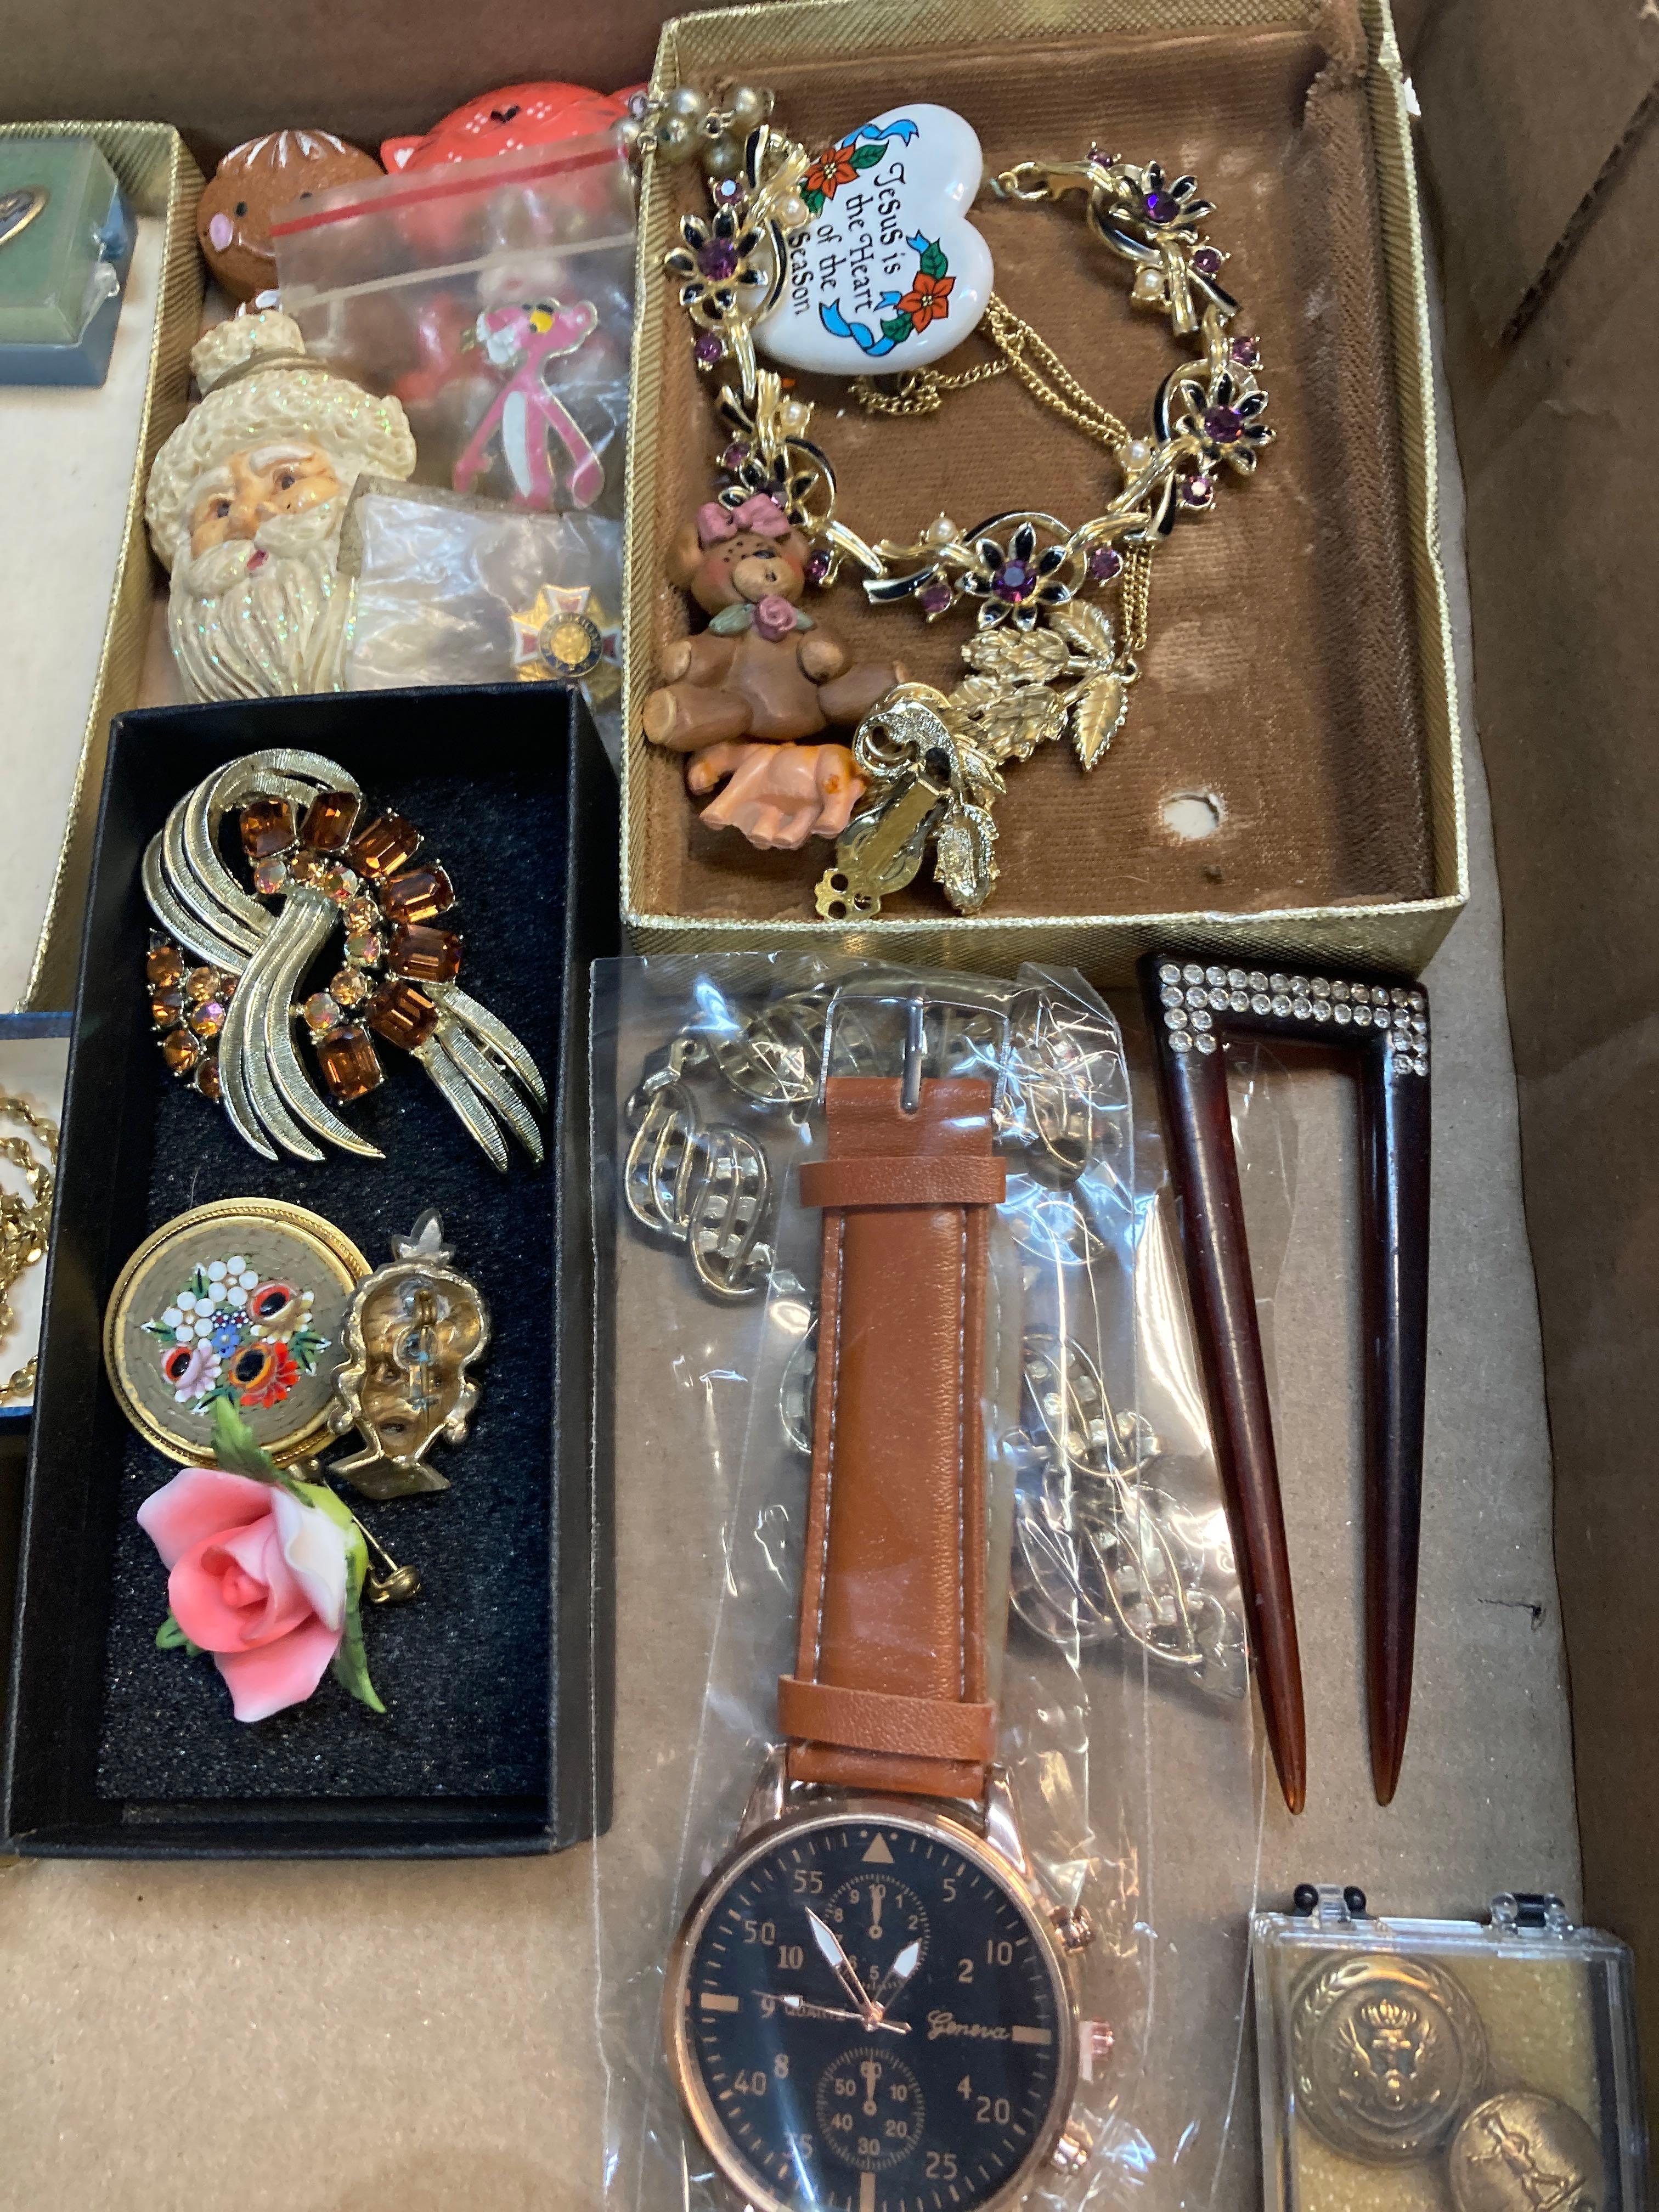 Costume jewelry and phone accessories